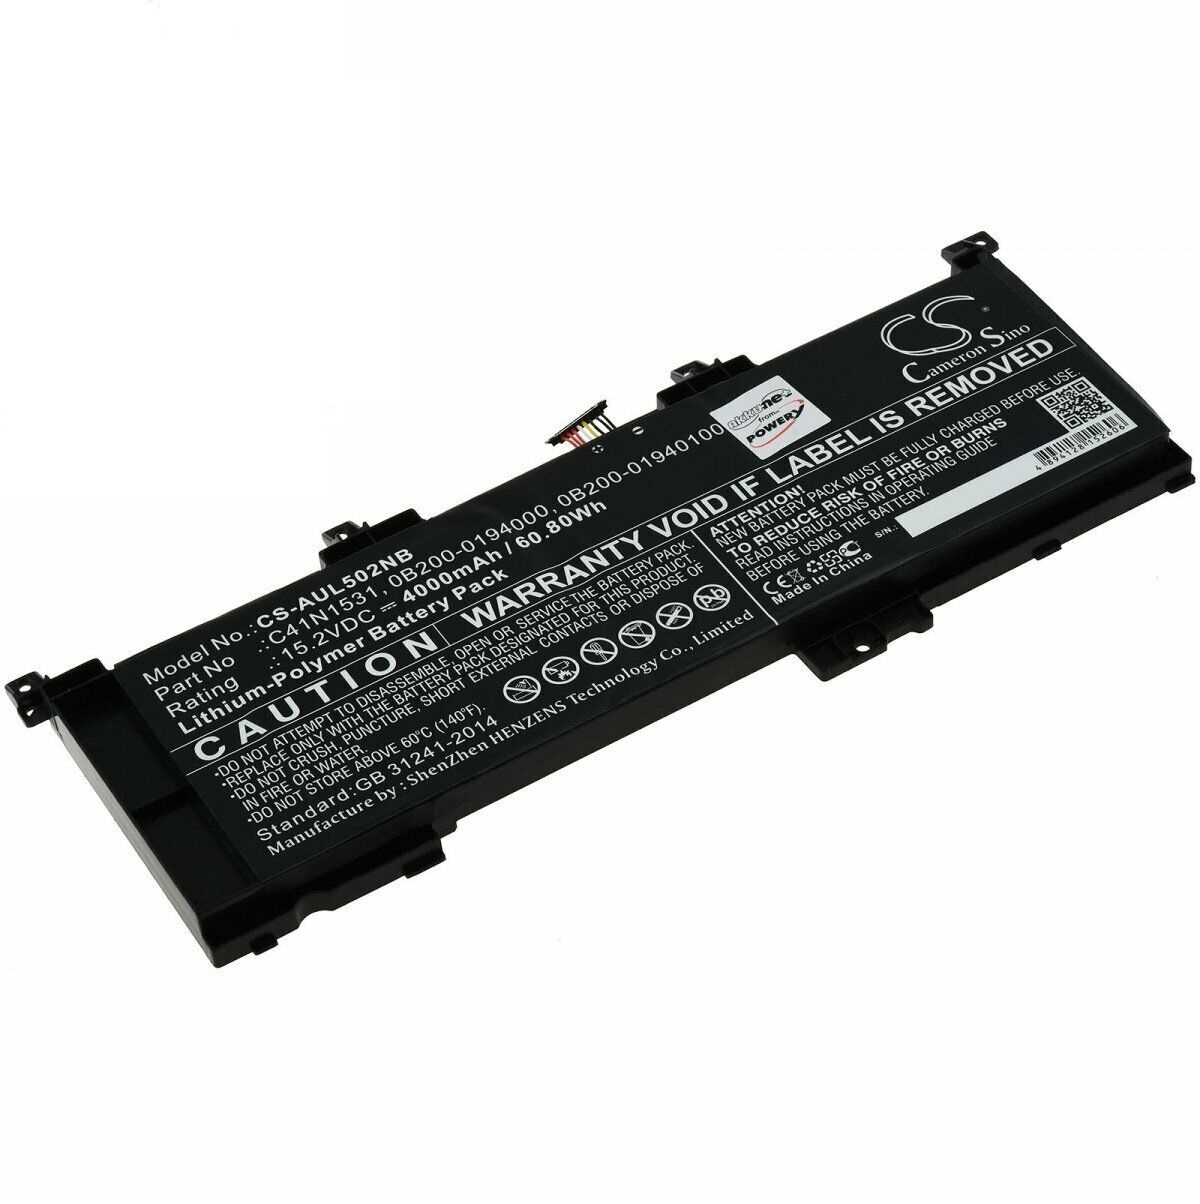 Batería para C41N1531 0B200-01940100 Asus GL502VS-1A GL502VS-1E GL502VT-1B GL502VY GL502VY-1A (compatible)